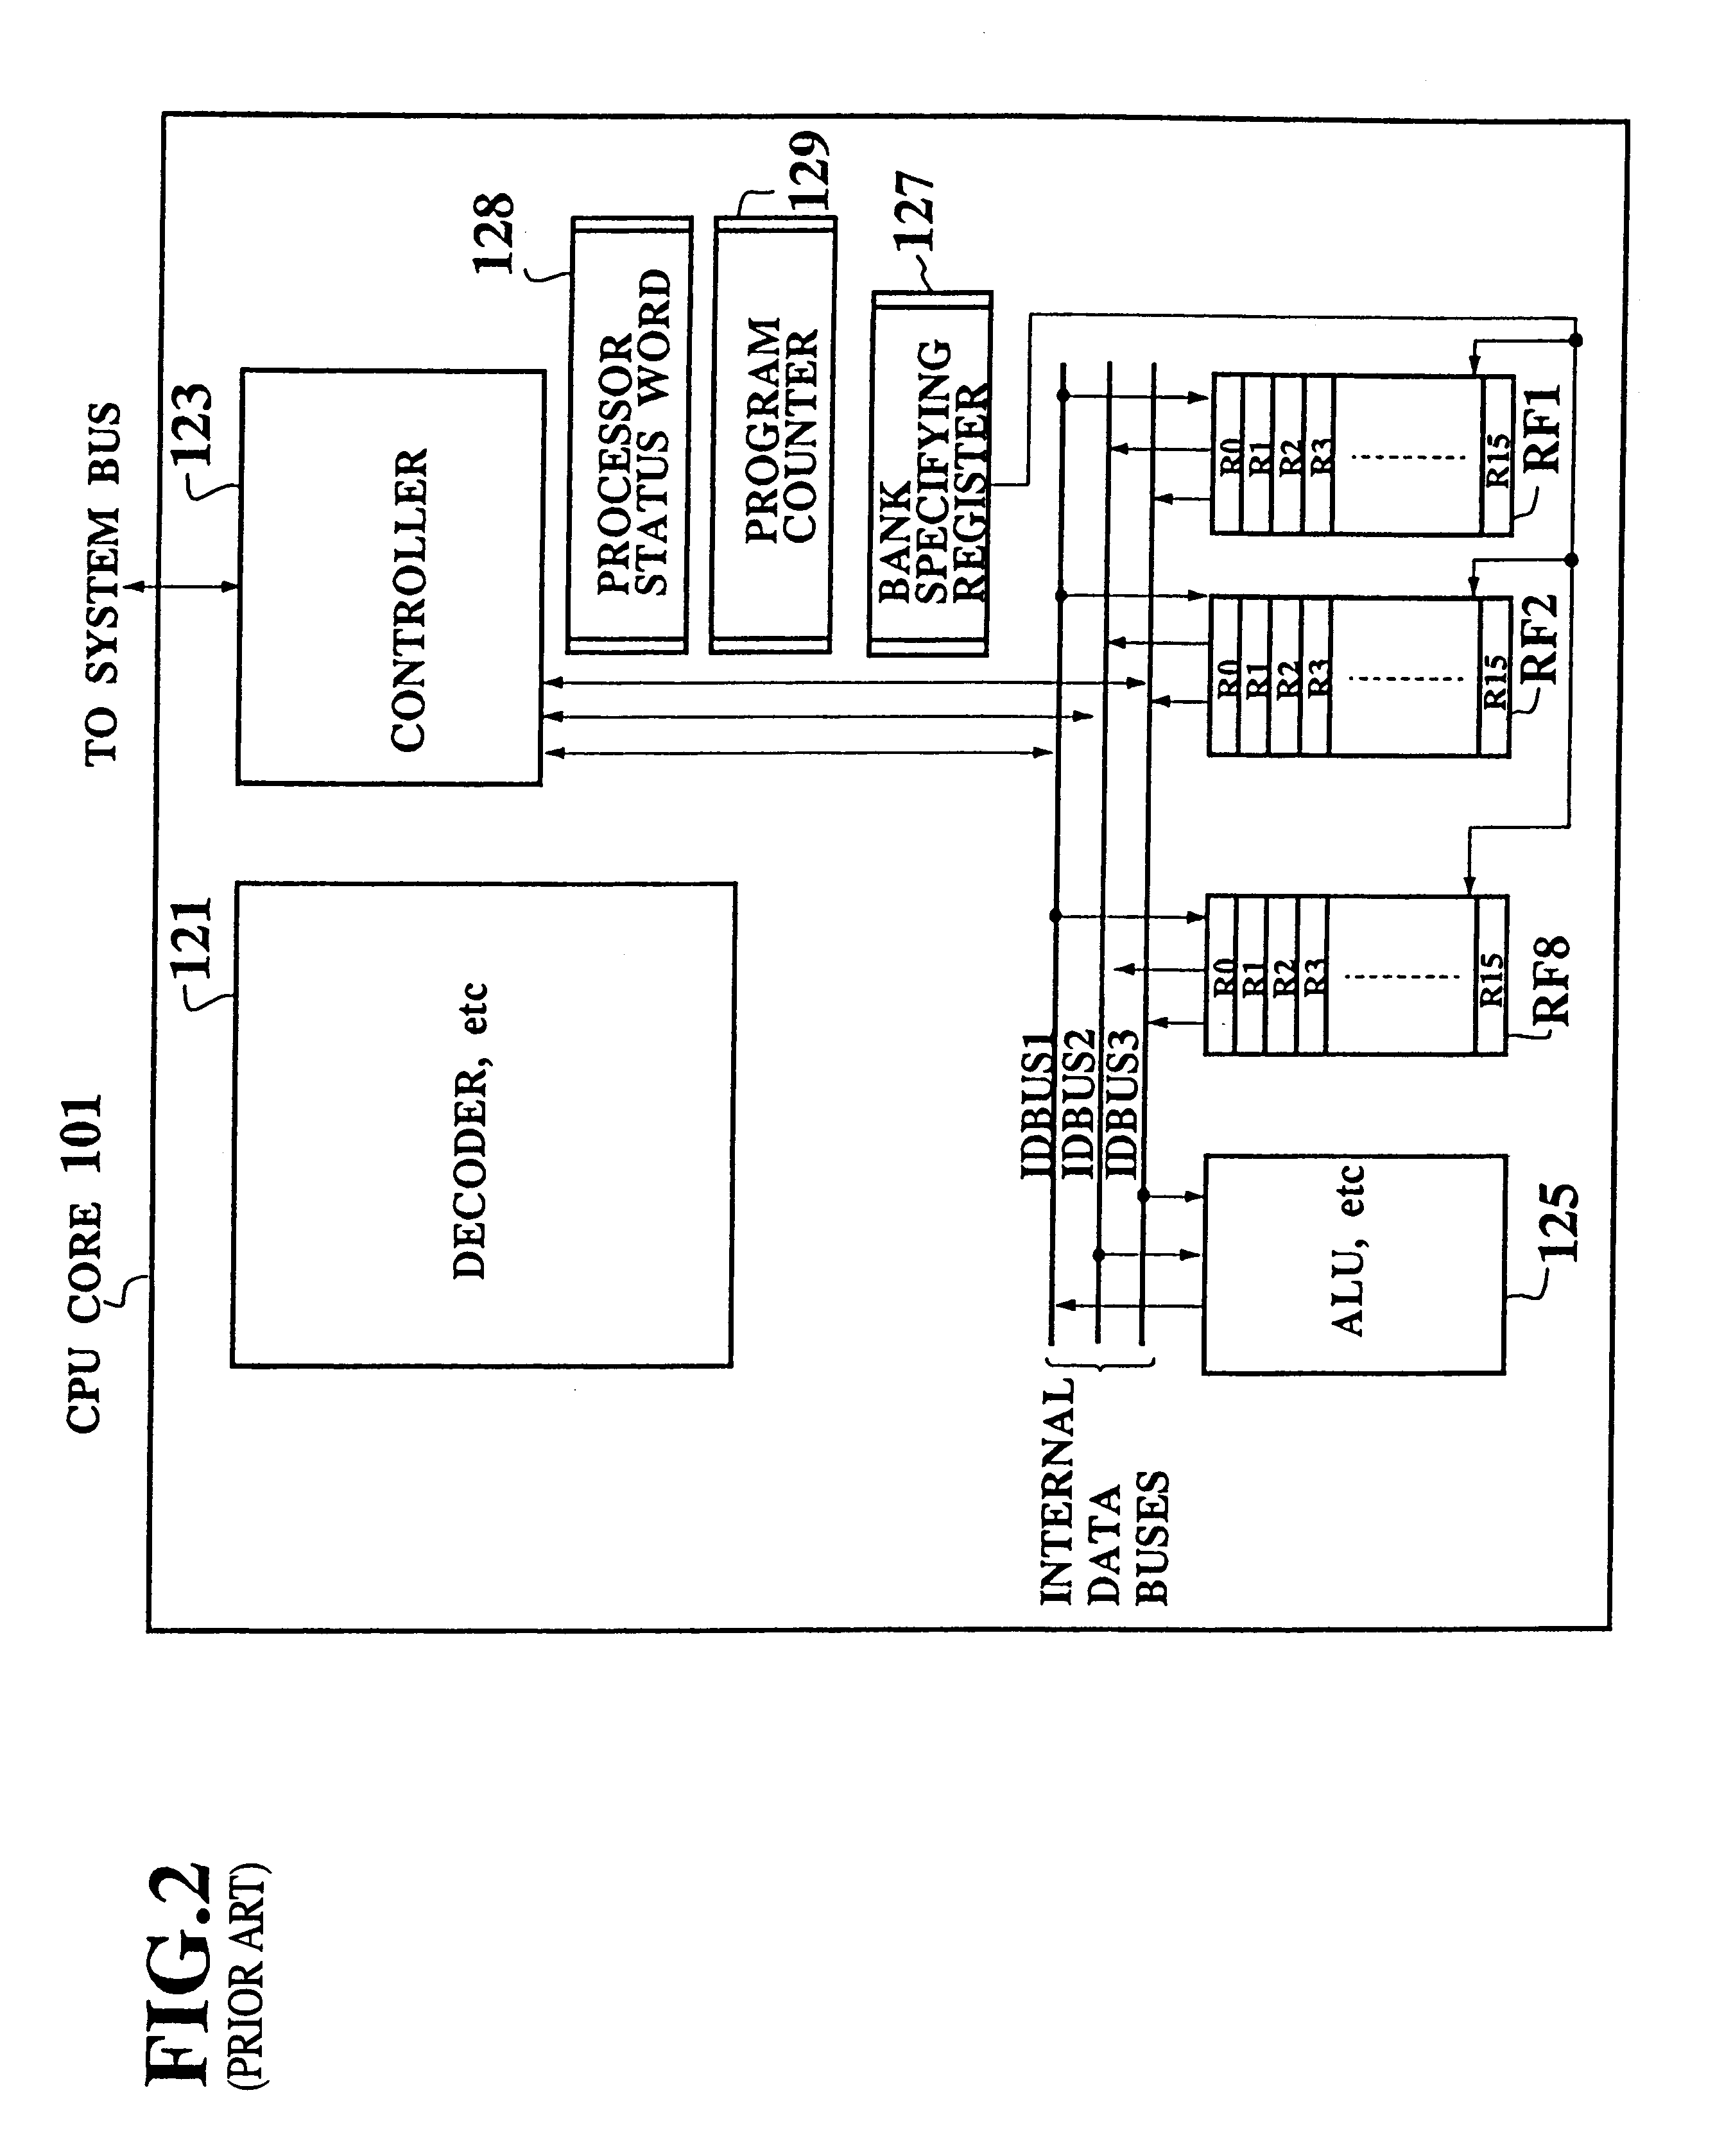 Single chip microcomputer having a dedicated address bus and dedicated data bus for transferring register bank data to and from an on-line RAM